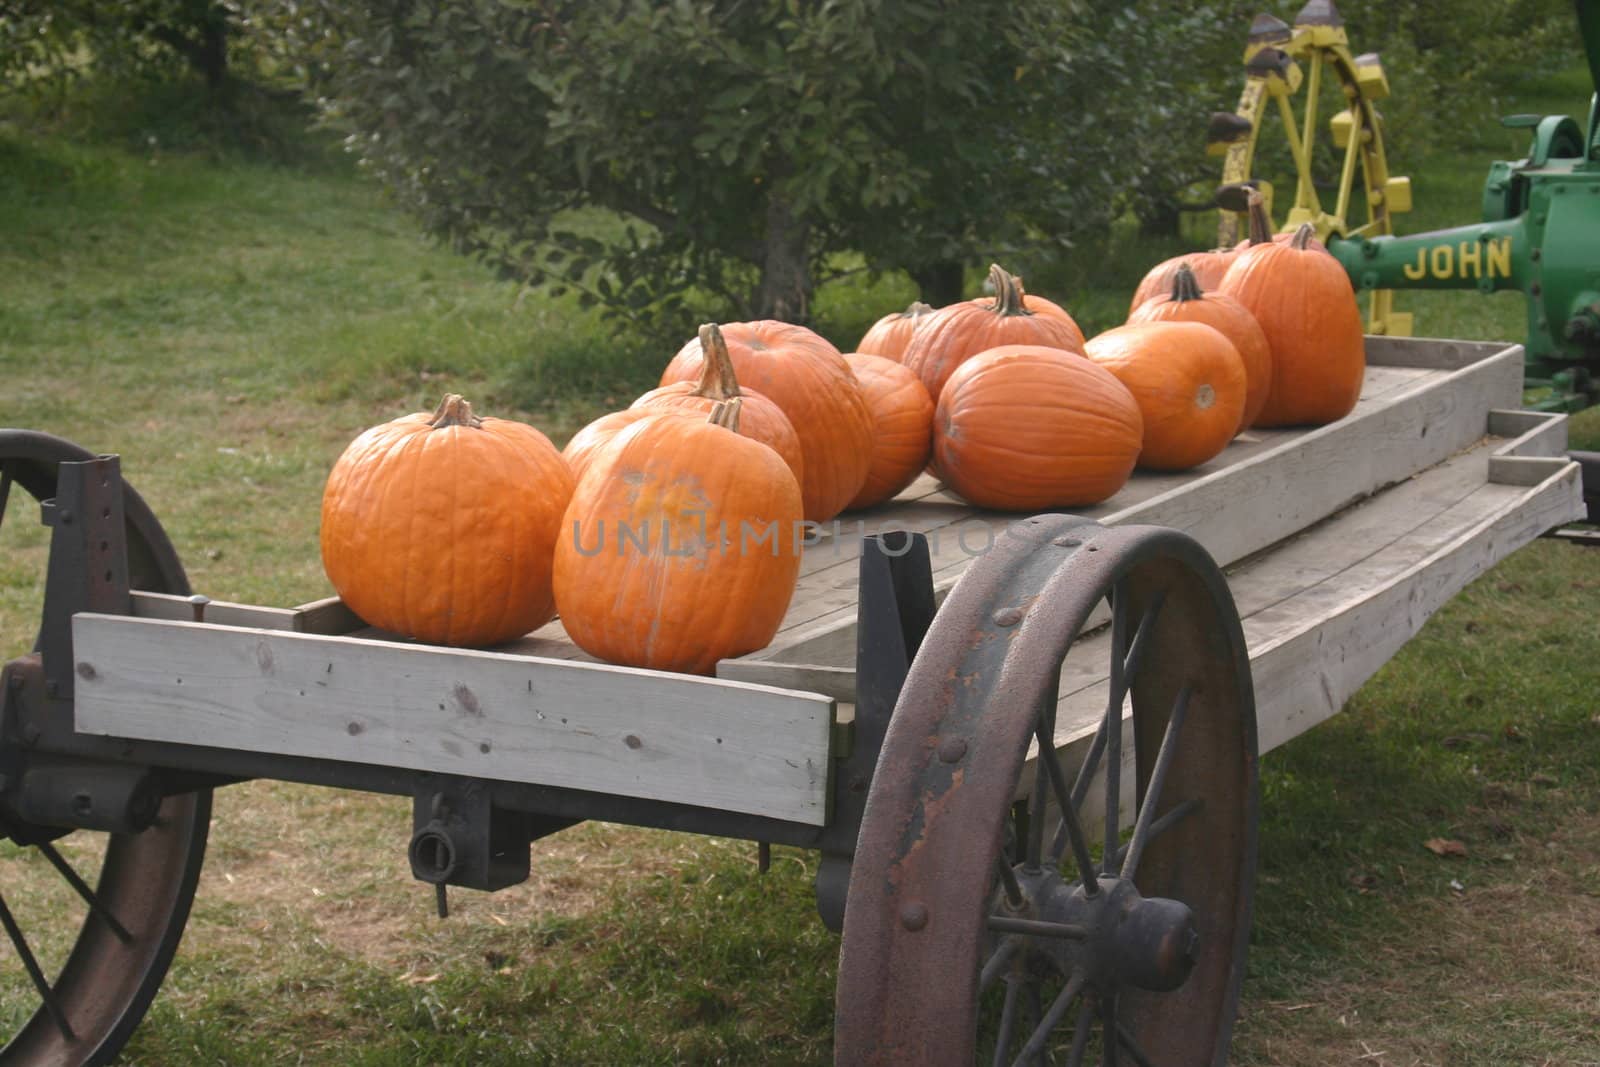 Pumpkins on a wagon being towed by an old farm tractor.